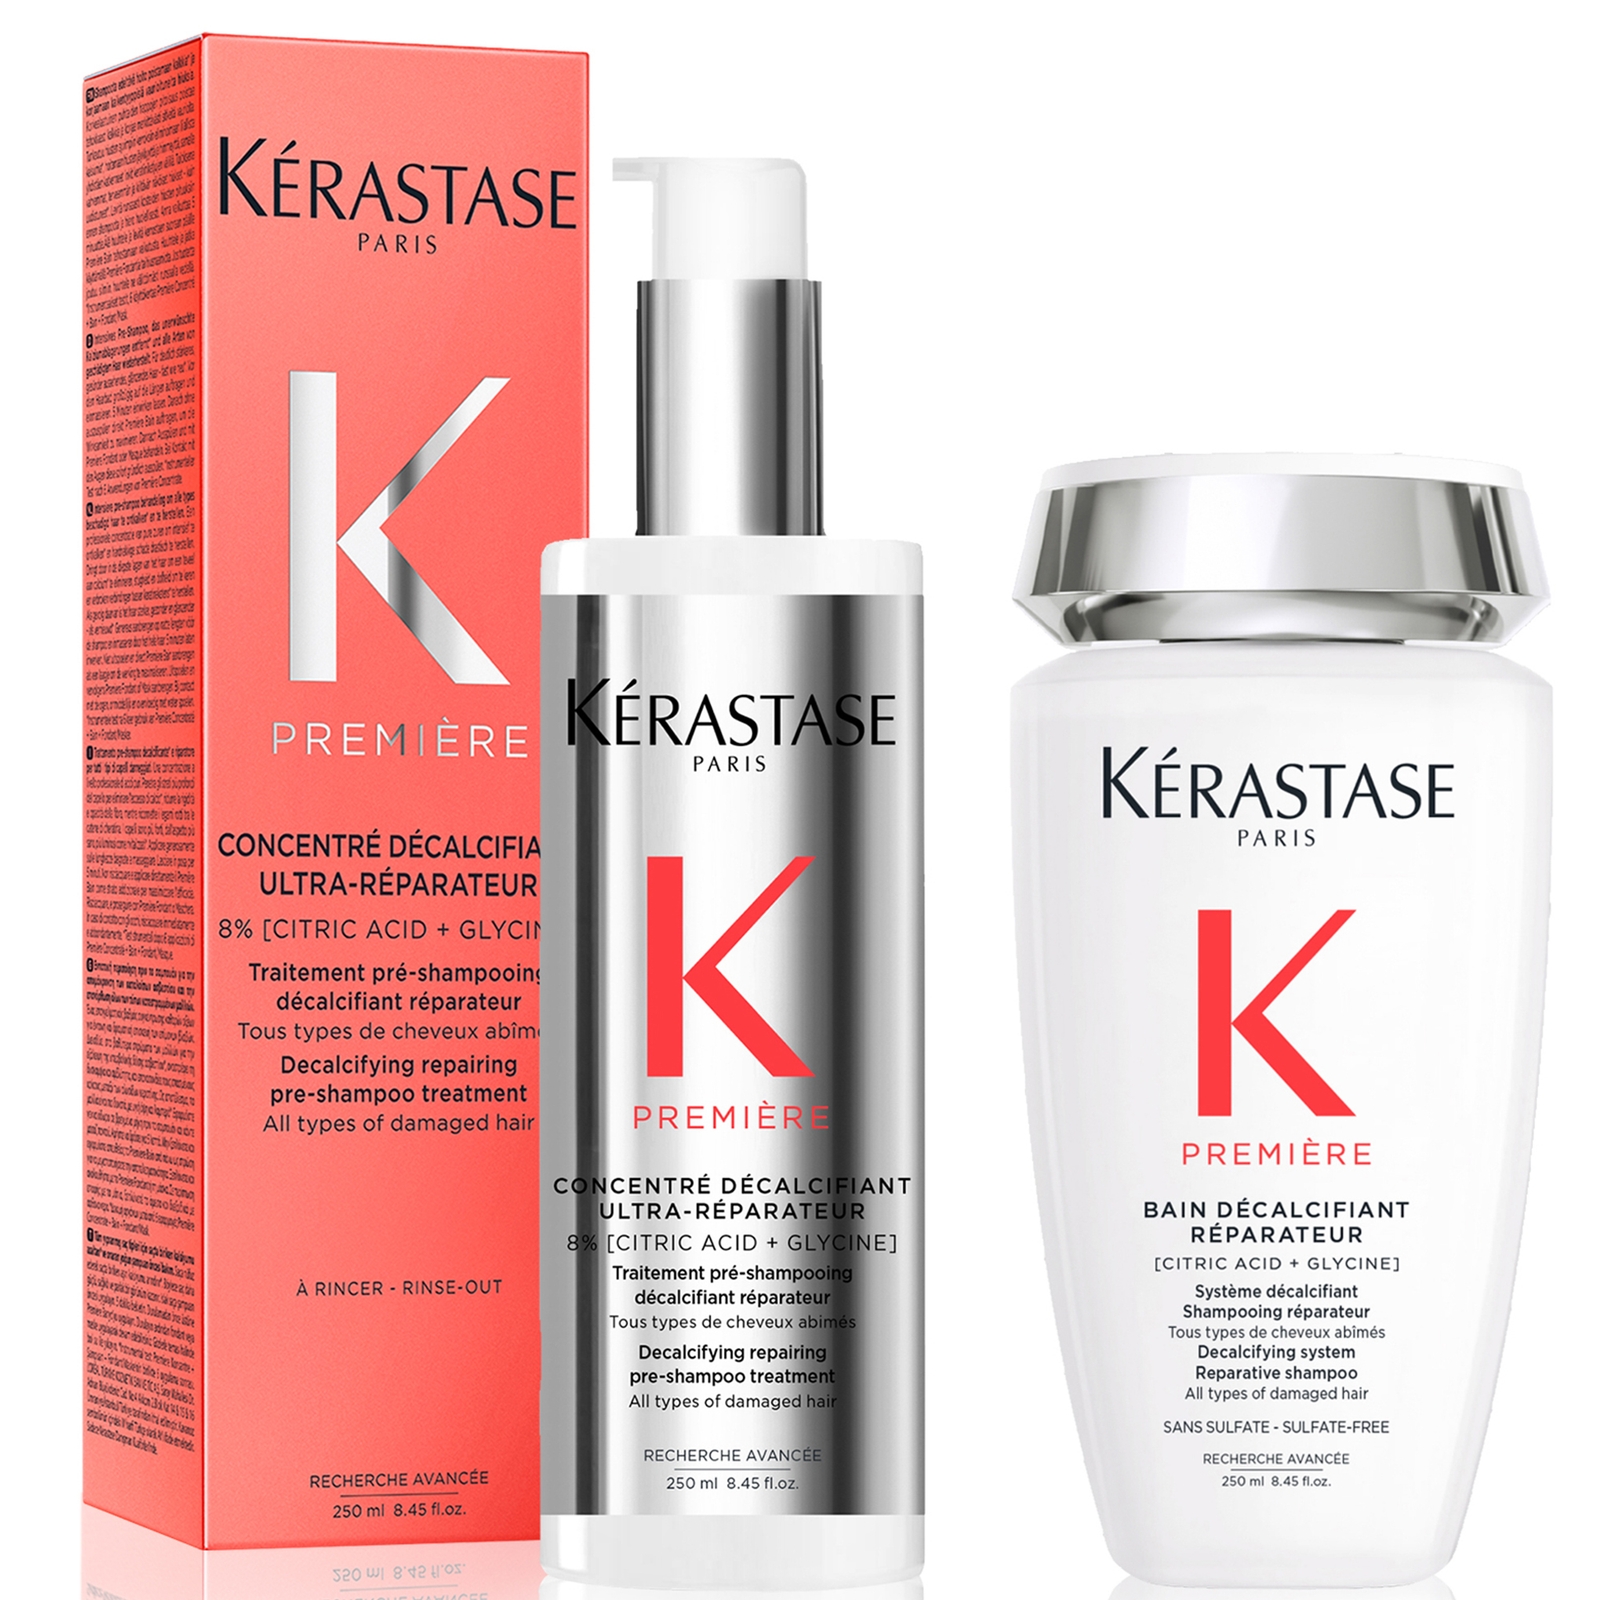 Image of Kérastase Première Decalcifying Repairing Pre-Shampoo and Shampoo for Damaged Hair with Pure Citric Acid and Glycine